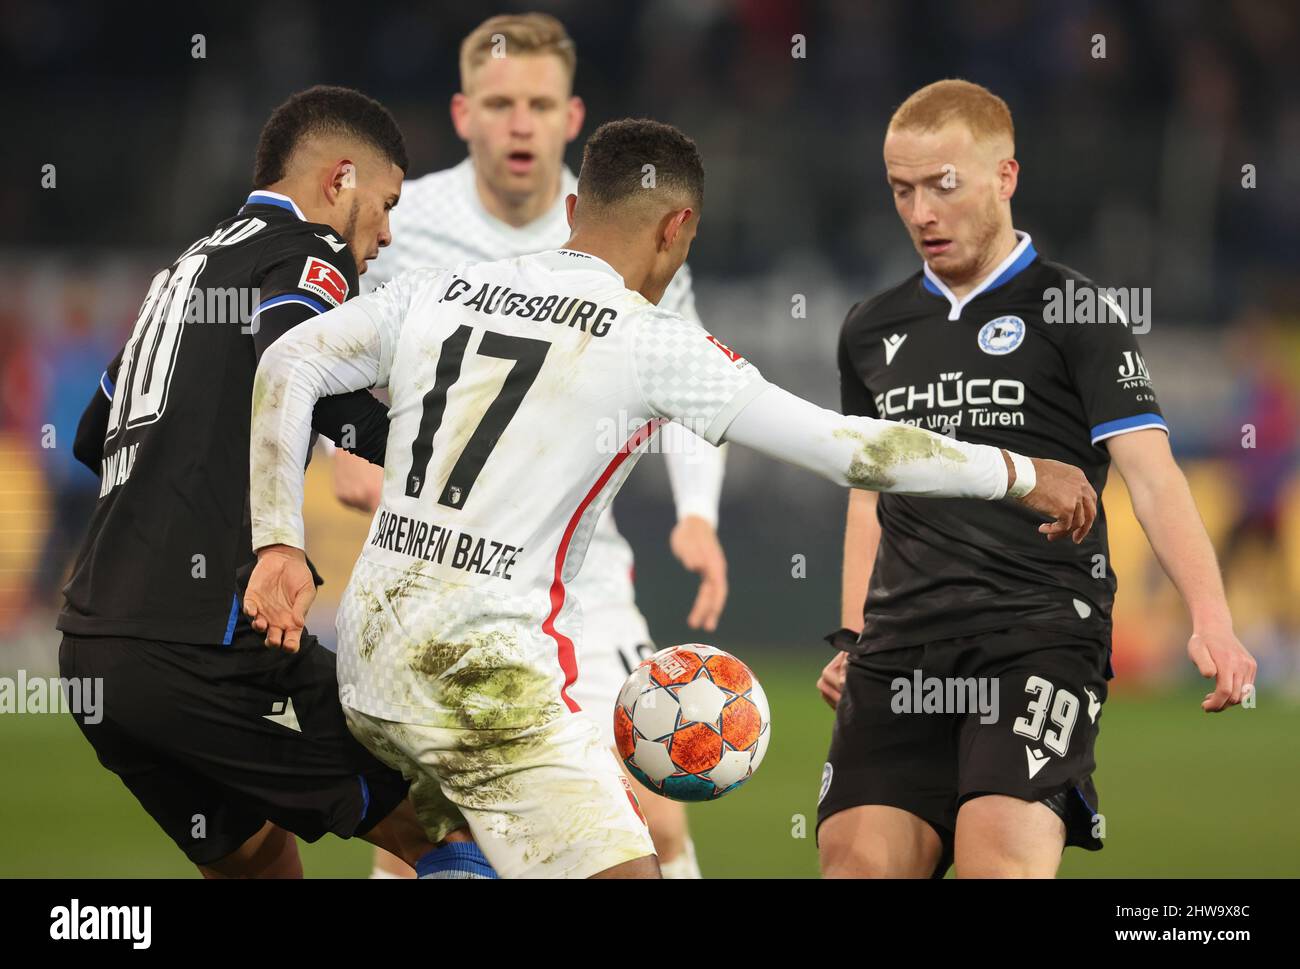 Bielefeld, Germany. 04th Mar, 2022. Soccer: Bundesliga, Arminia Bielefeld - FC Augsburg, Matchday 25 at the Schüco Arena. Bielefeld's Andres Andrade (l) battles for the ball with Augsburg's Noah Joel Sarenren Bazee (2nd from left). Credit: Friso Gentsch/dpa - IMPORTANT NOTE: In accordance with the requirements of the DFL Deutsche Fußball Liga and the DFB Deutscher Fußball-Bund, it is prohibited to use or have used photographs taken in the stadium and/or of the match in the form of sequence pictures and/or video-like photo series./dpa/Alamy Live News Stock Photo